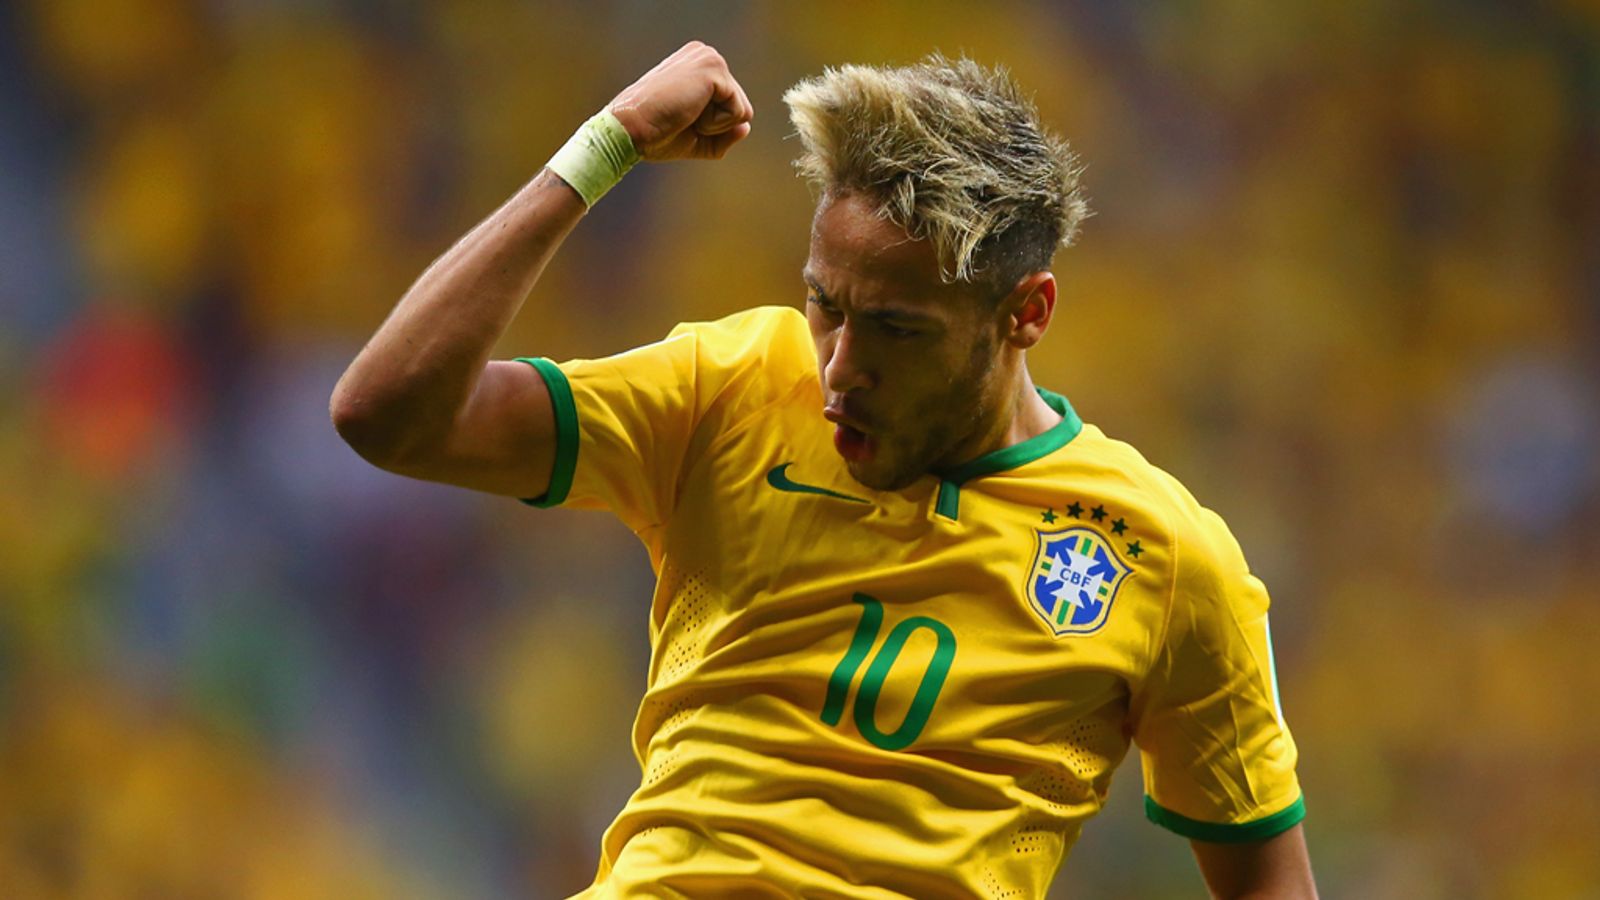 World Cup: Brazil beat Cameroon 4-1 in Brasilia to set up last-16 clash v Chile | Football News | Sky Sports